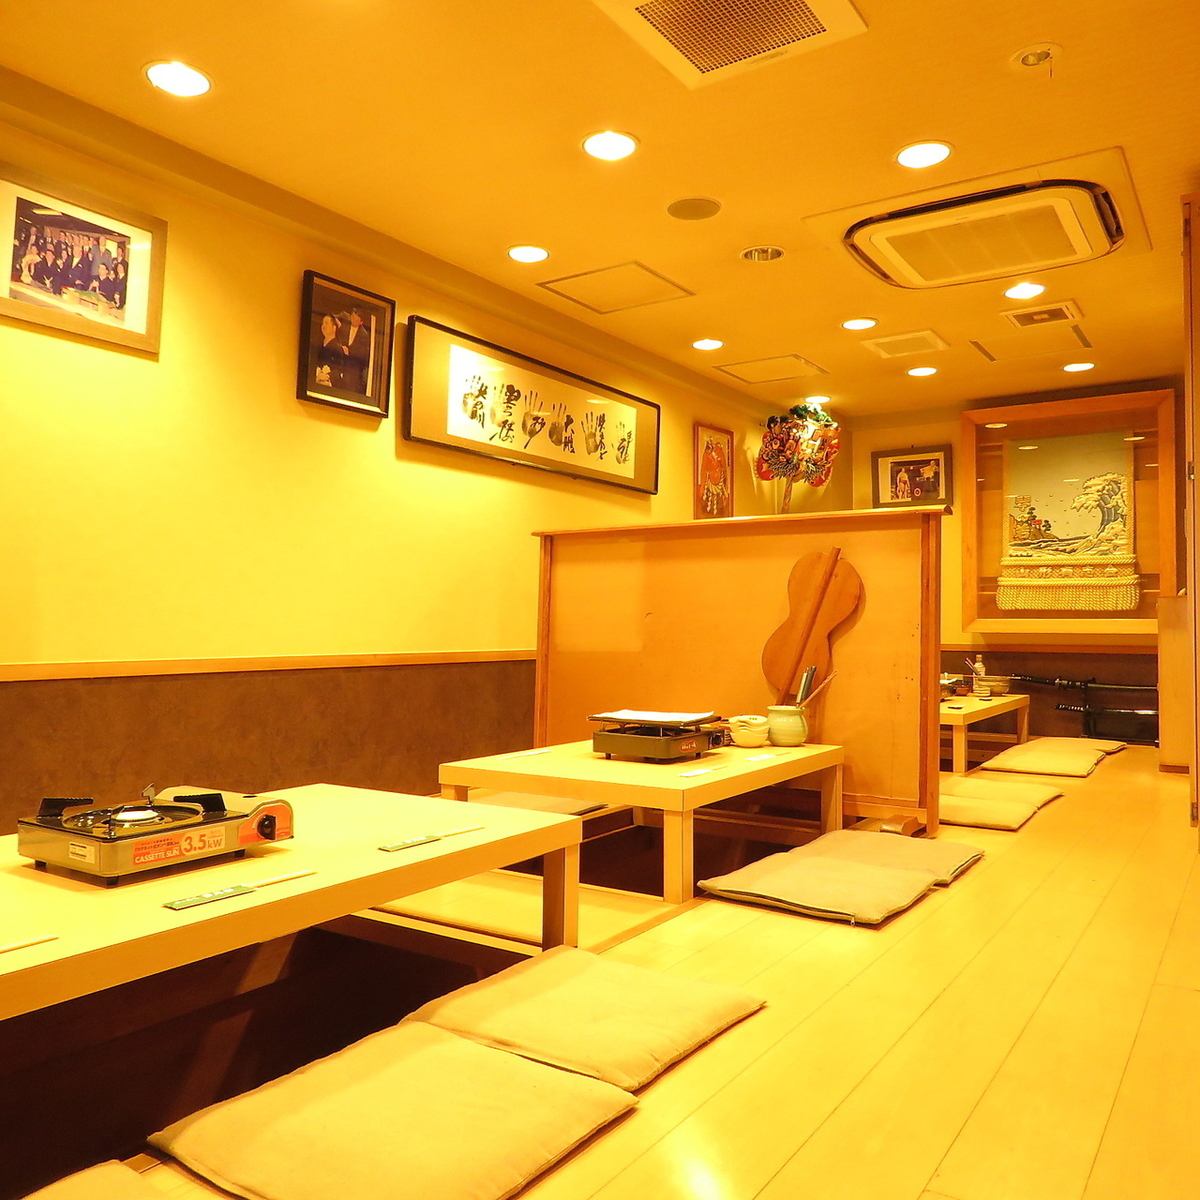 A 3-minute walk from Nerima Station! Enjoy our specialty Japanese cuisine, fresh fish, and tempura!